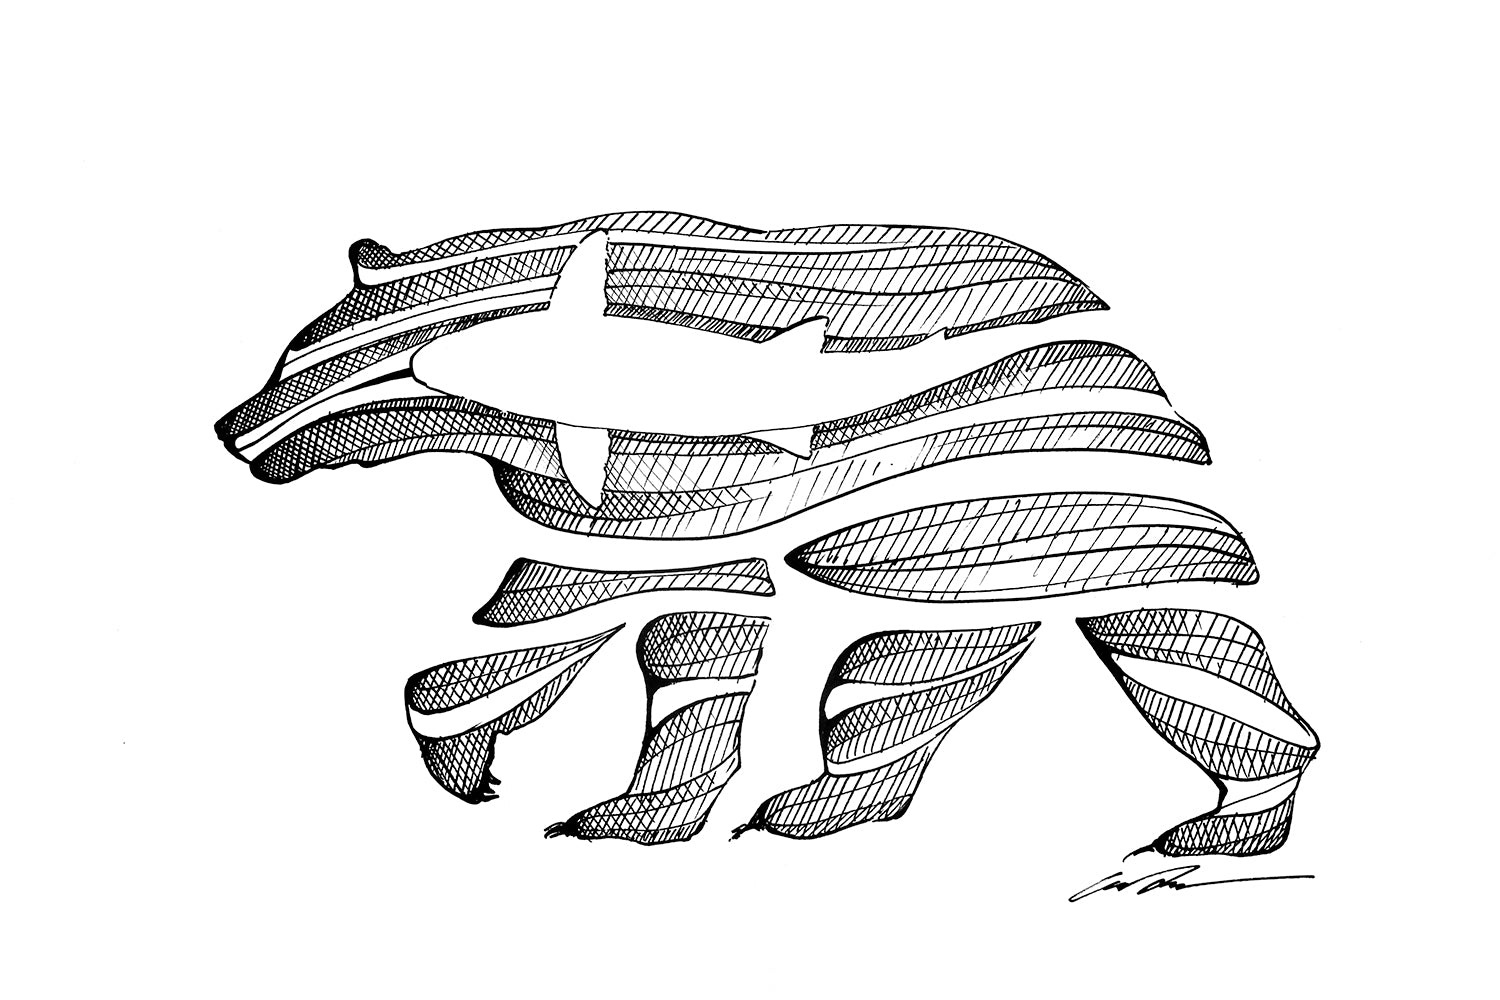 A black and white sketch in the shape of a bear with a trout inside of it